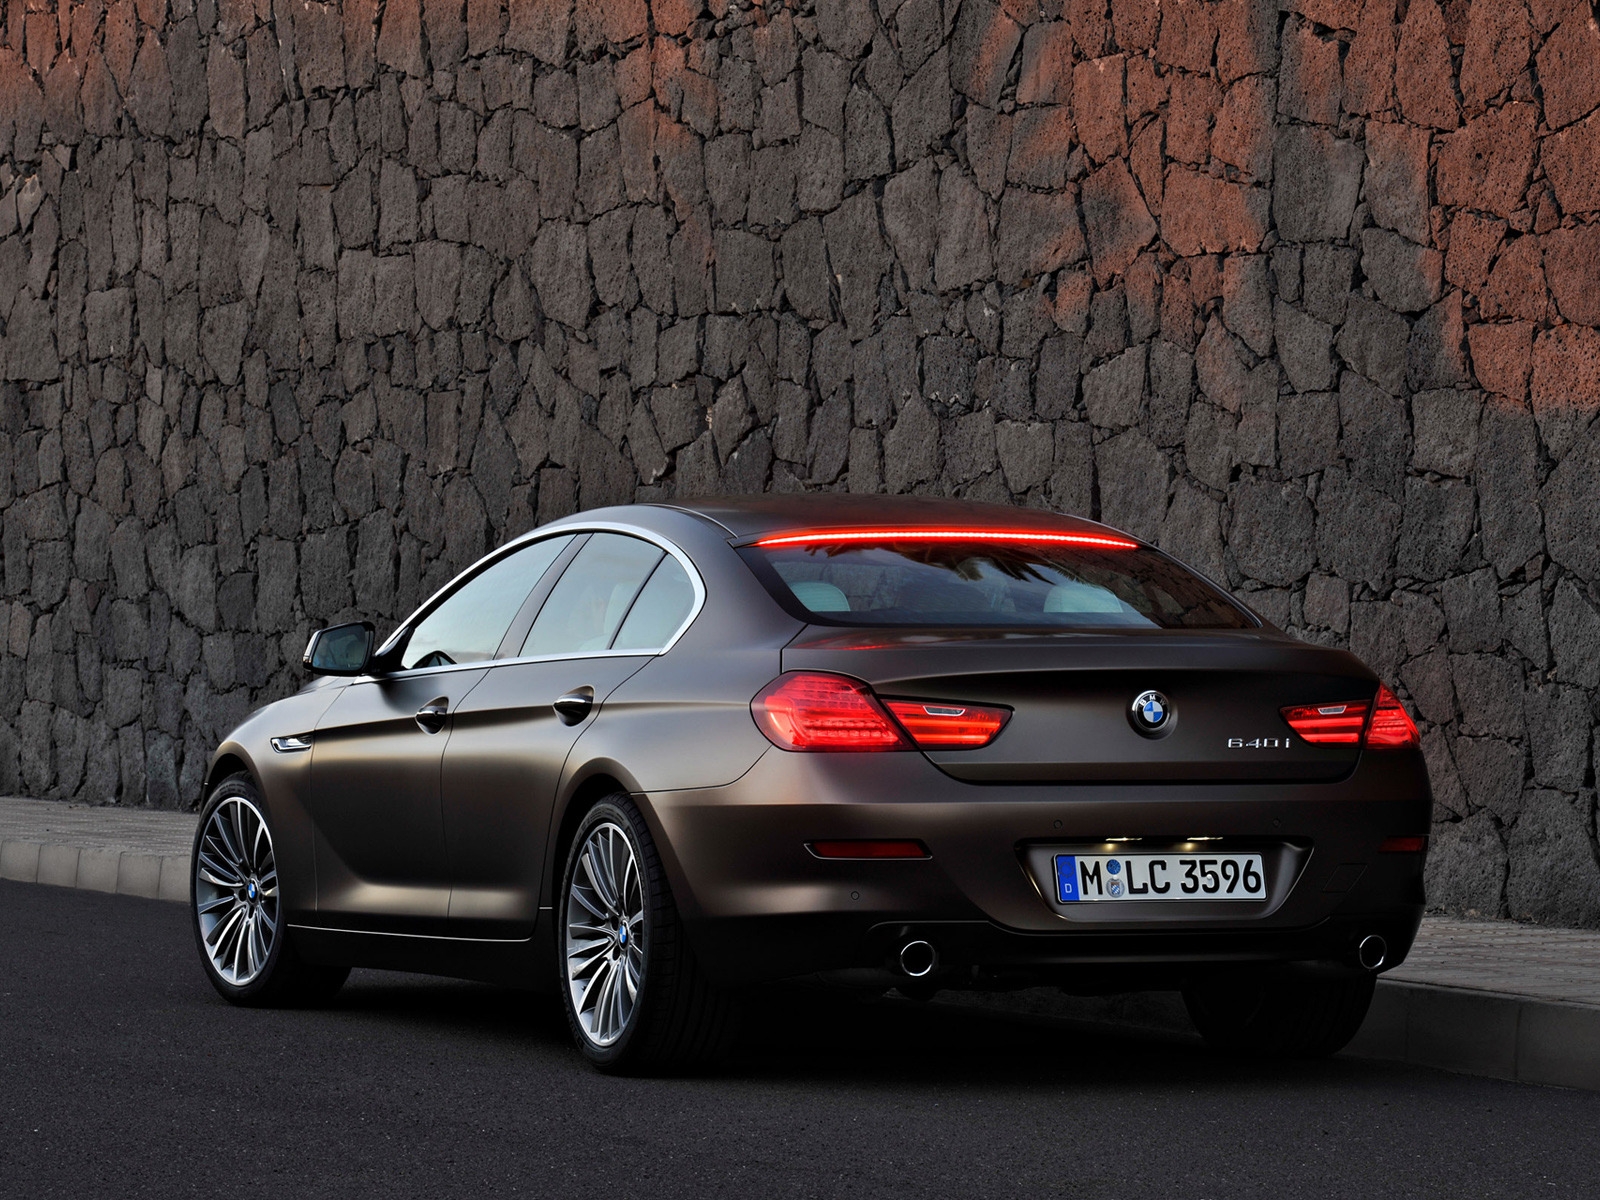 BMW 6 Gran Coupe Rear for 1600 x 1200 resolution